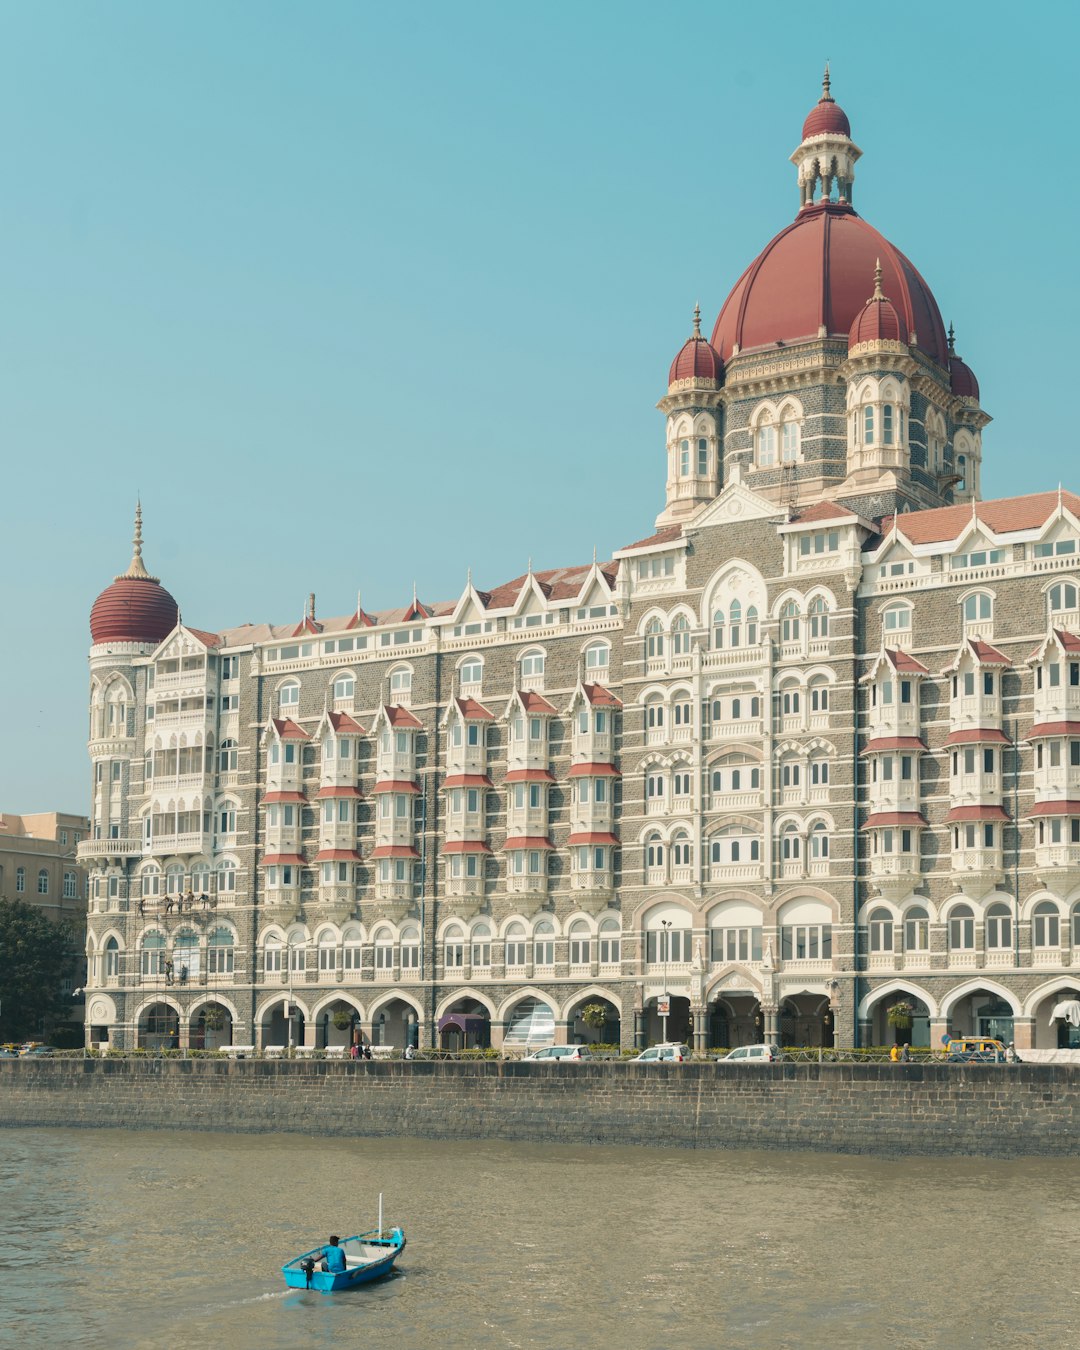 Travel Tips and Stories of Taj Mahal Palace & Tower in India